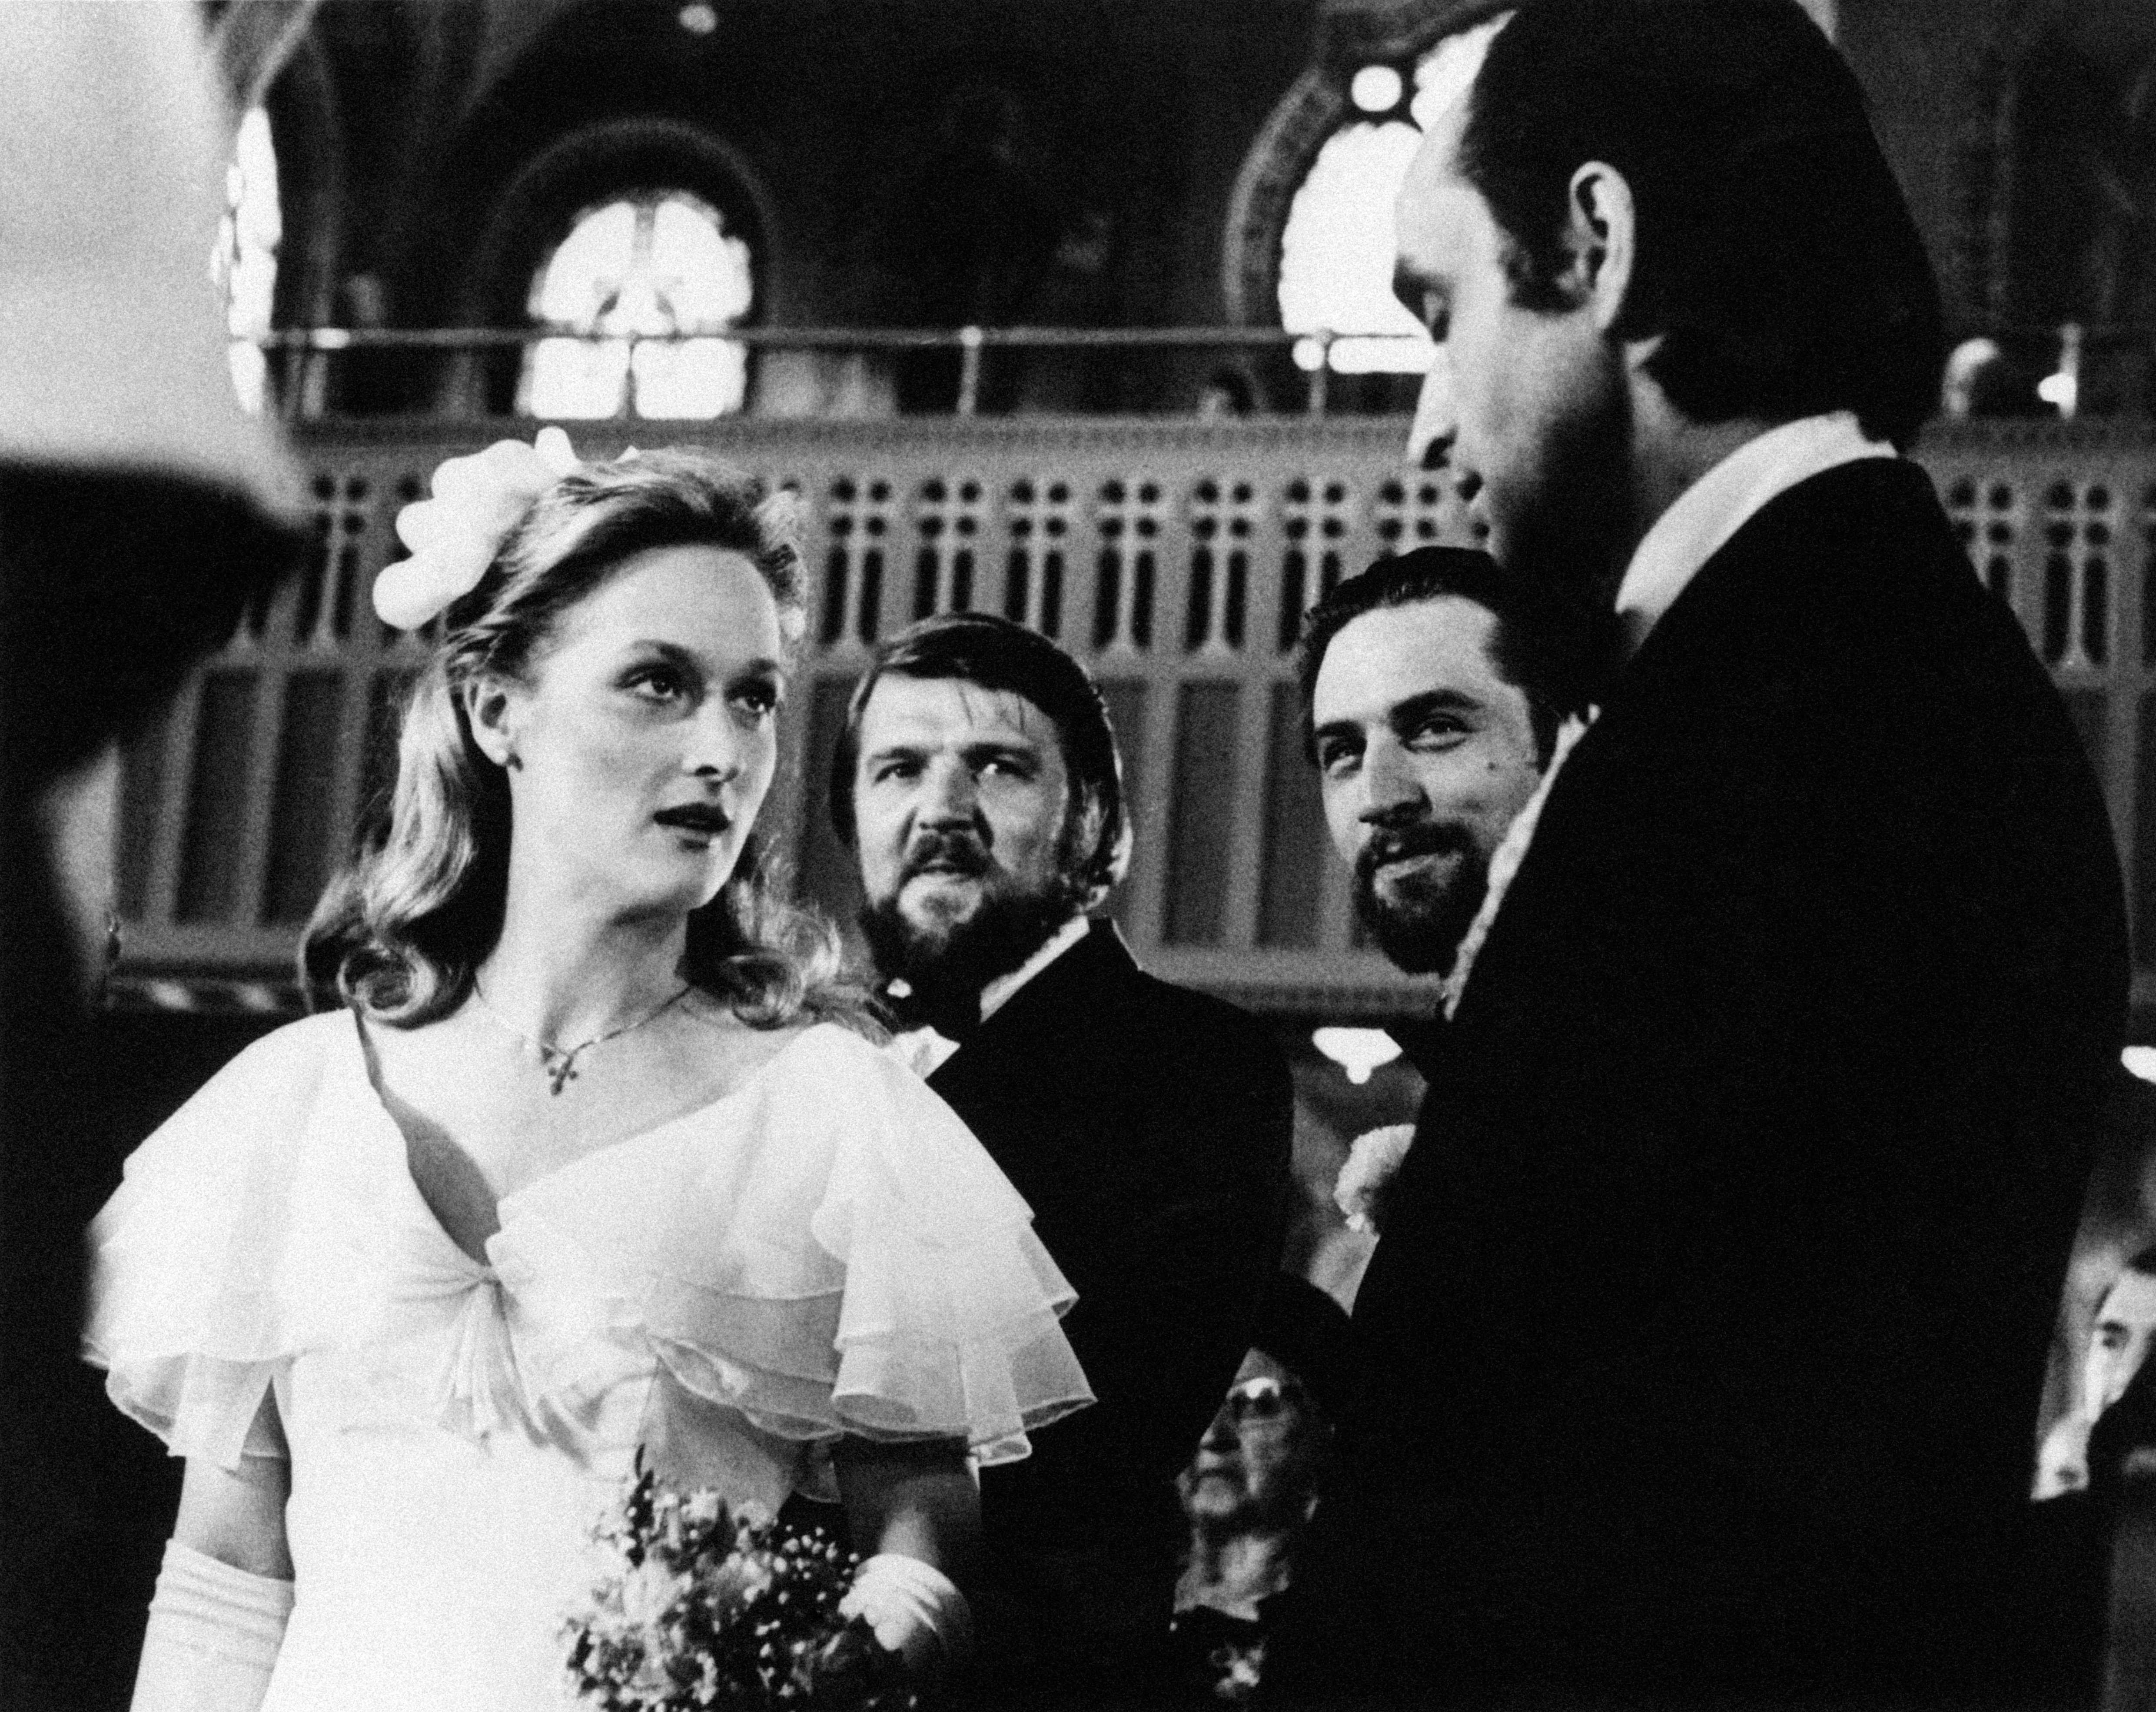 Meryl Streep pictured looking at John Cazale in the movie "The Deer Hunter" in 1978. | Photo: Getty Images